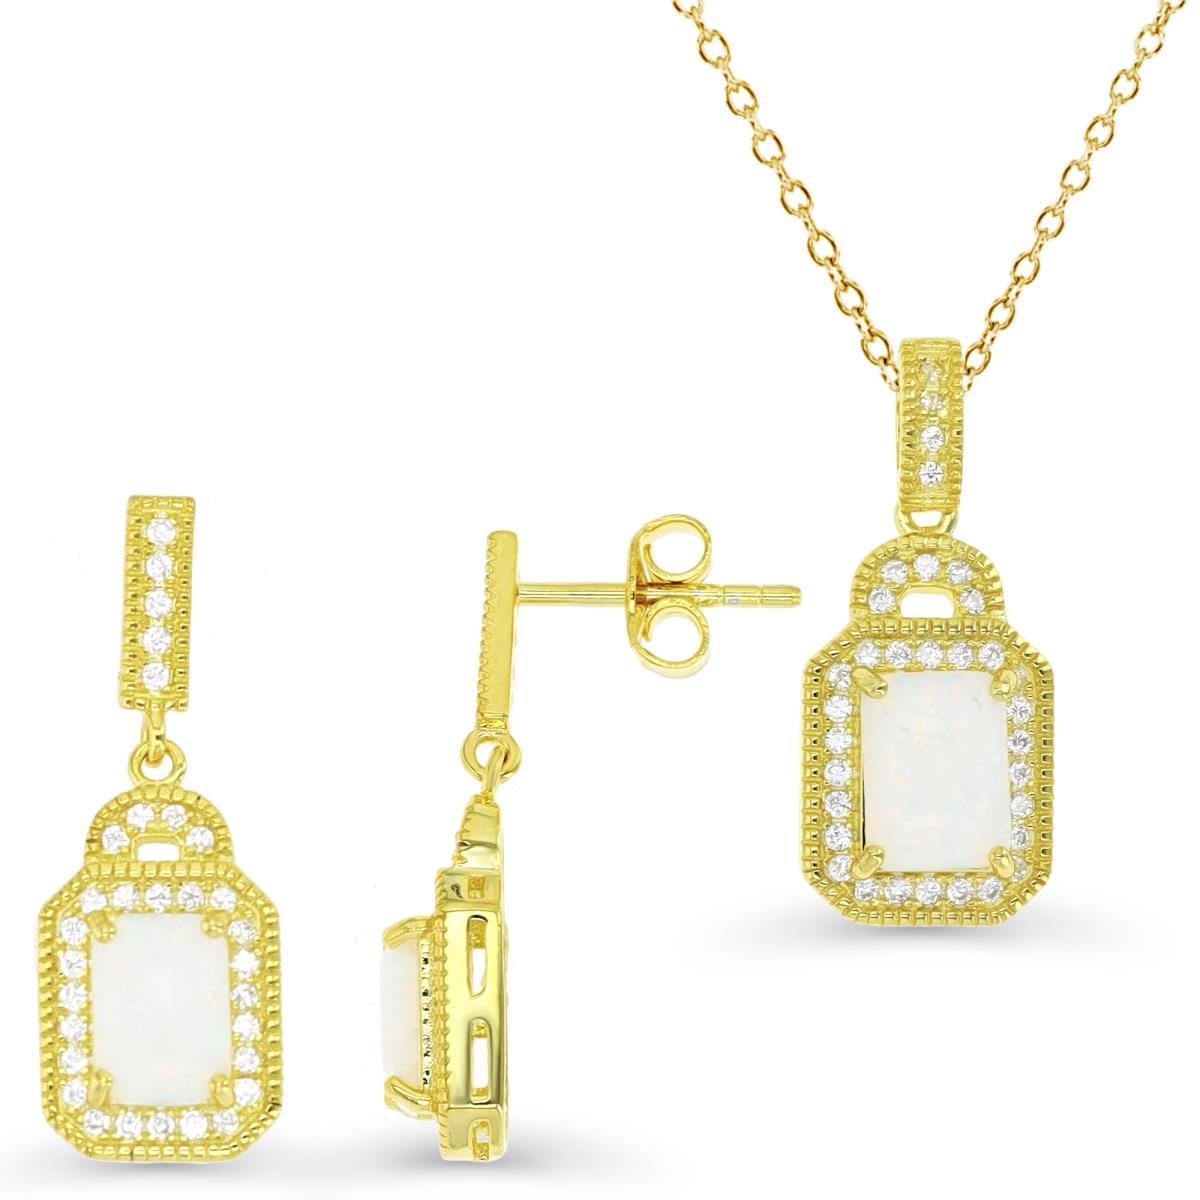 Sterling Silver Yellow 1M & CU Ct. Cr. White Opal and White CZ Halo Drop Earrings and Necklace Set